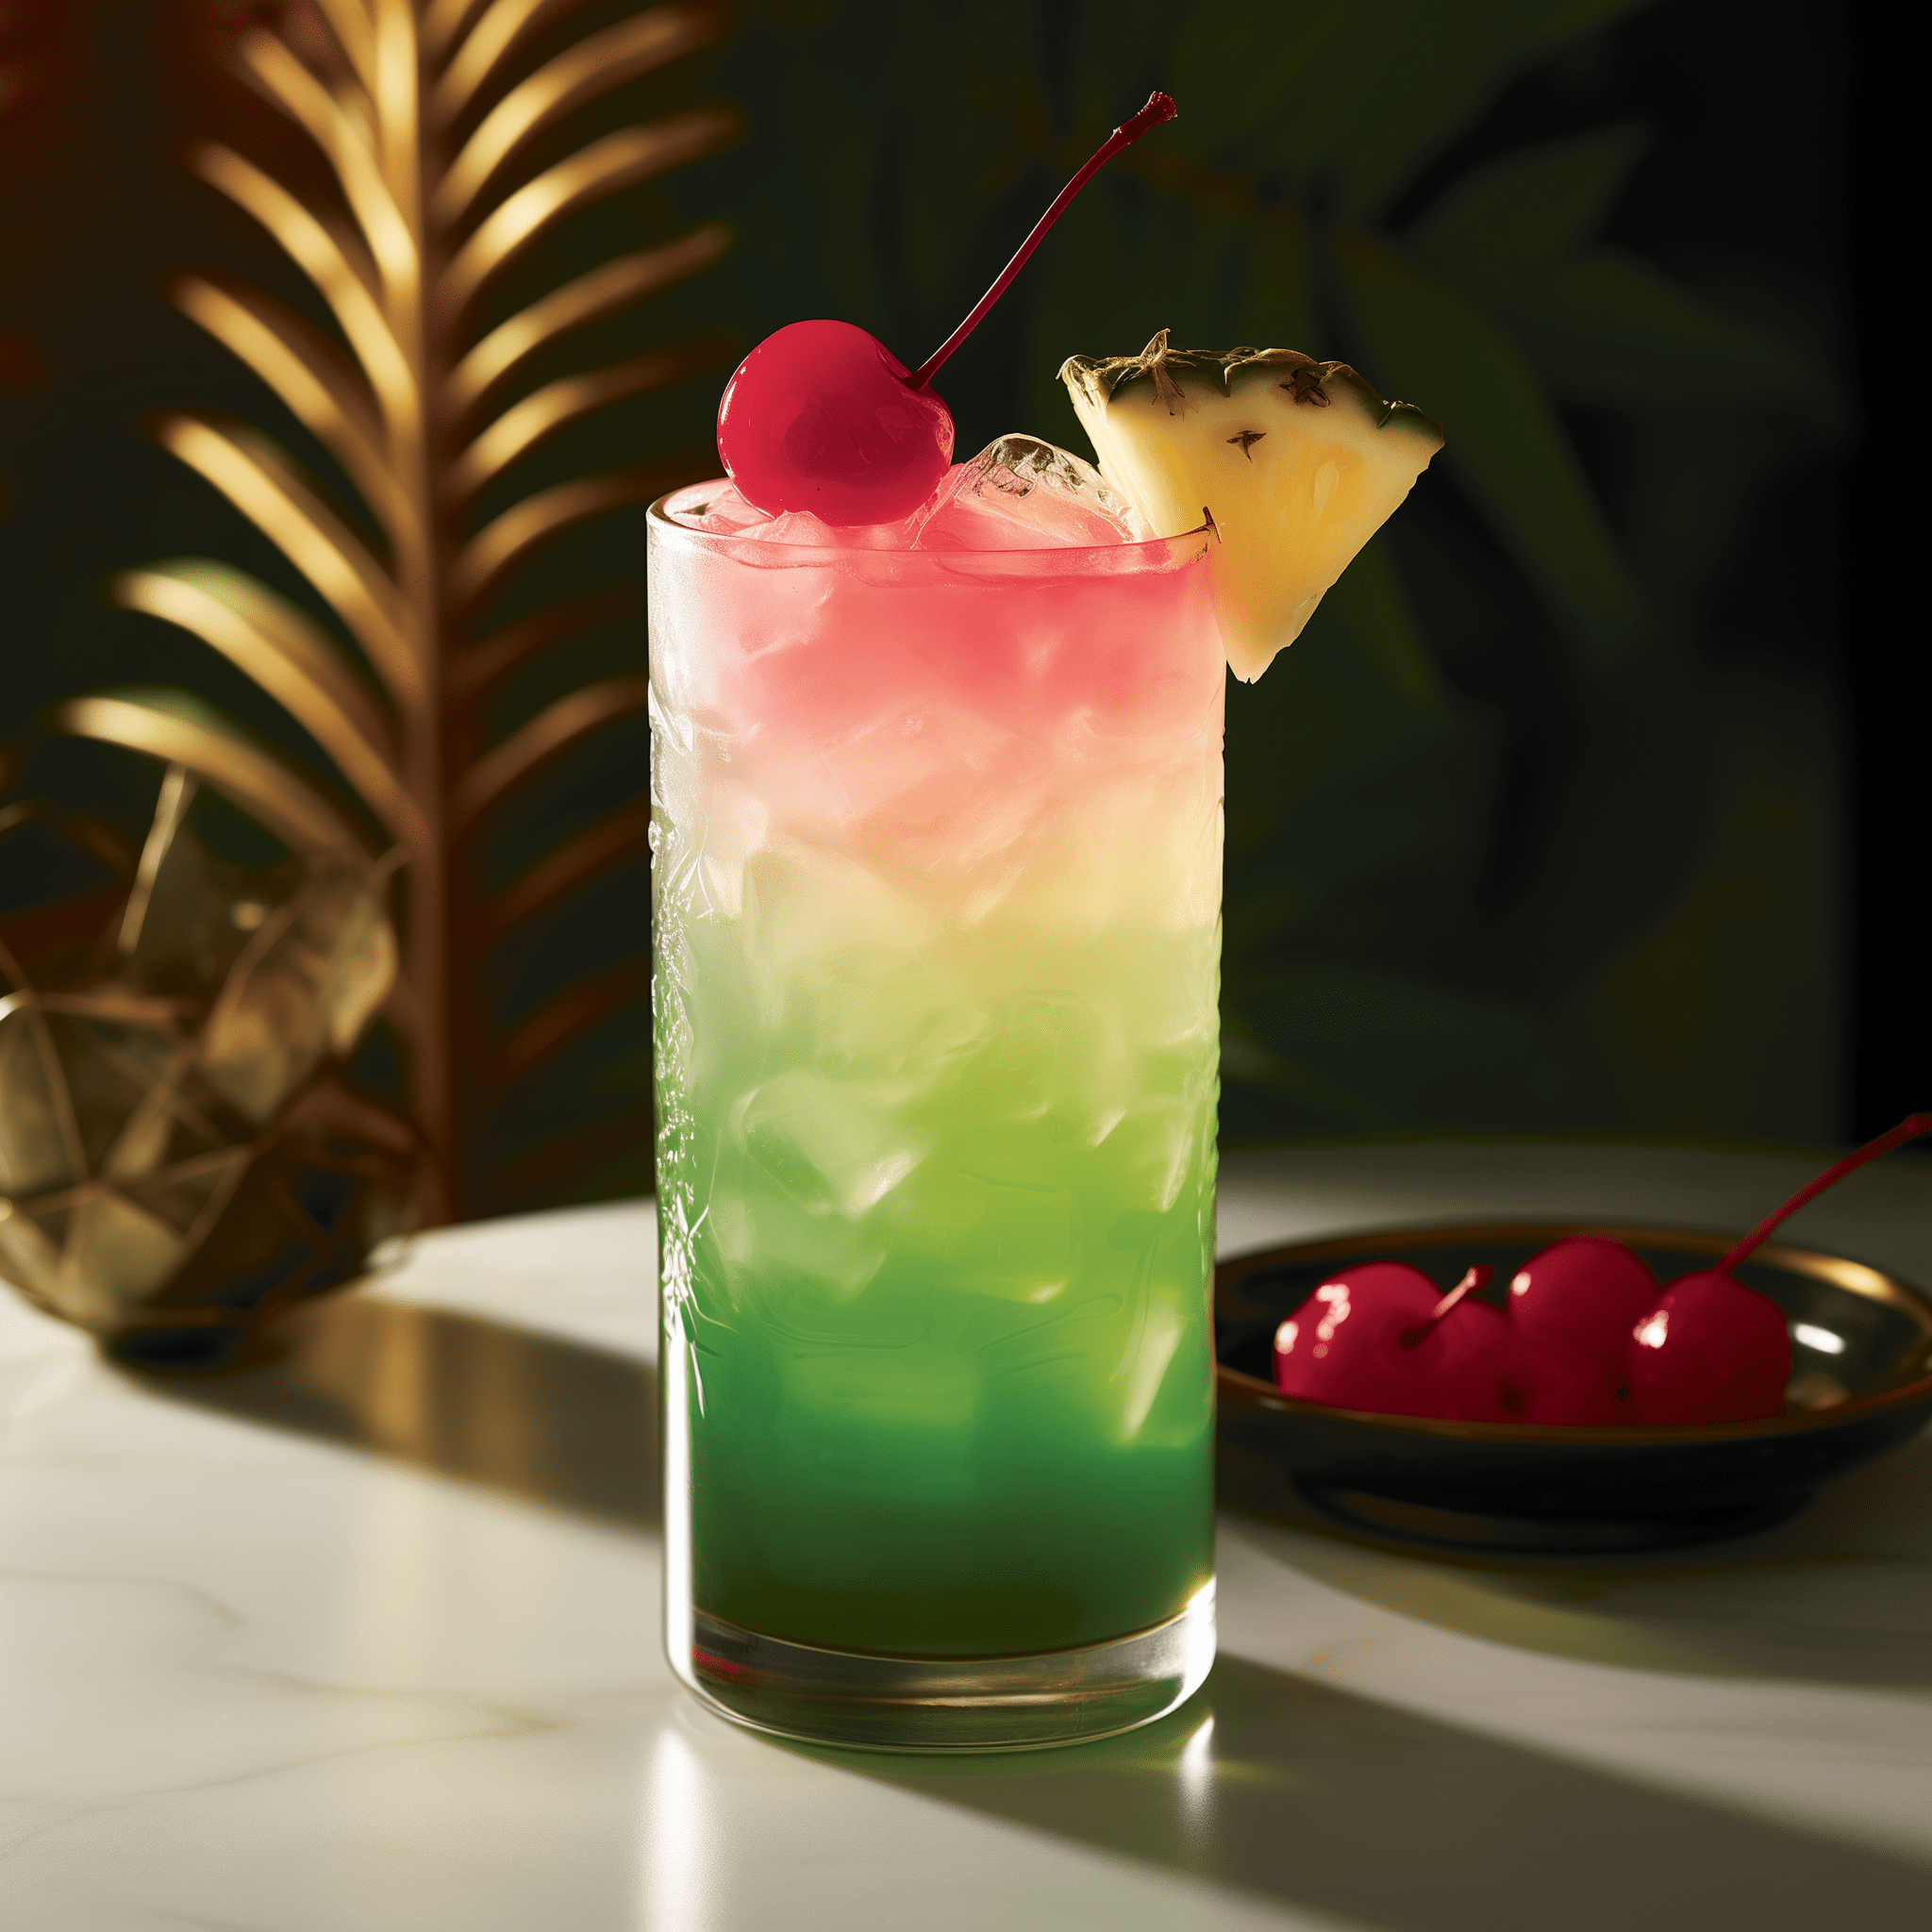 Kungaloosh Cocktail Recipe - The Kungaloosh is a sweet and fruity cocktail with a tropical flair. The combination of vodka and Malibu Rum provides a smooth, slightly coconutty base, while Midori adds a melon hint. The pineapple and cranberry juices create a refreshing and tangy balance, making it a delightful sipper.